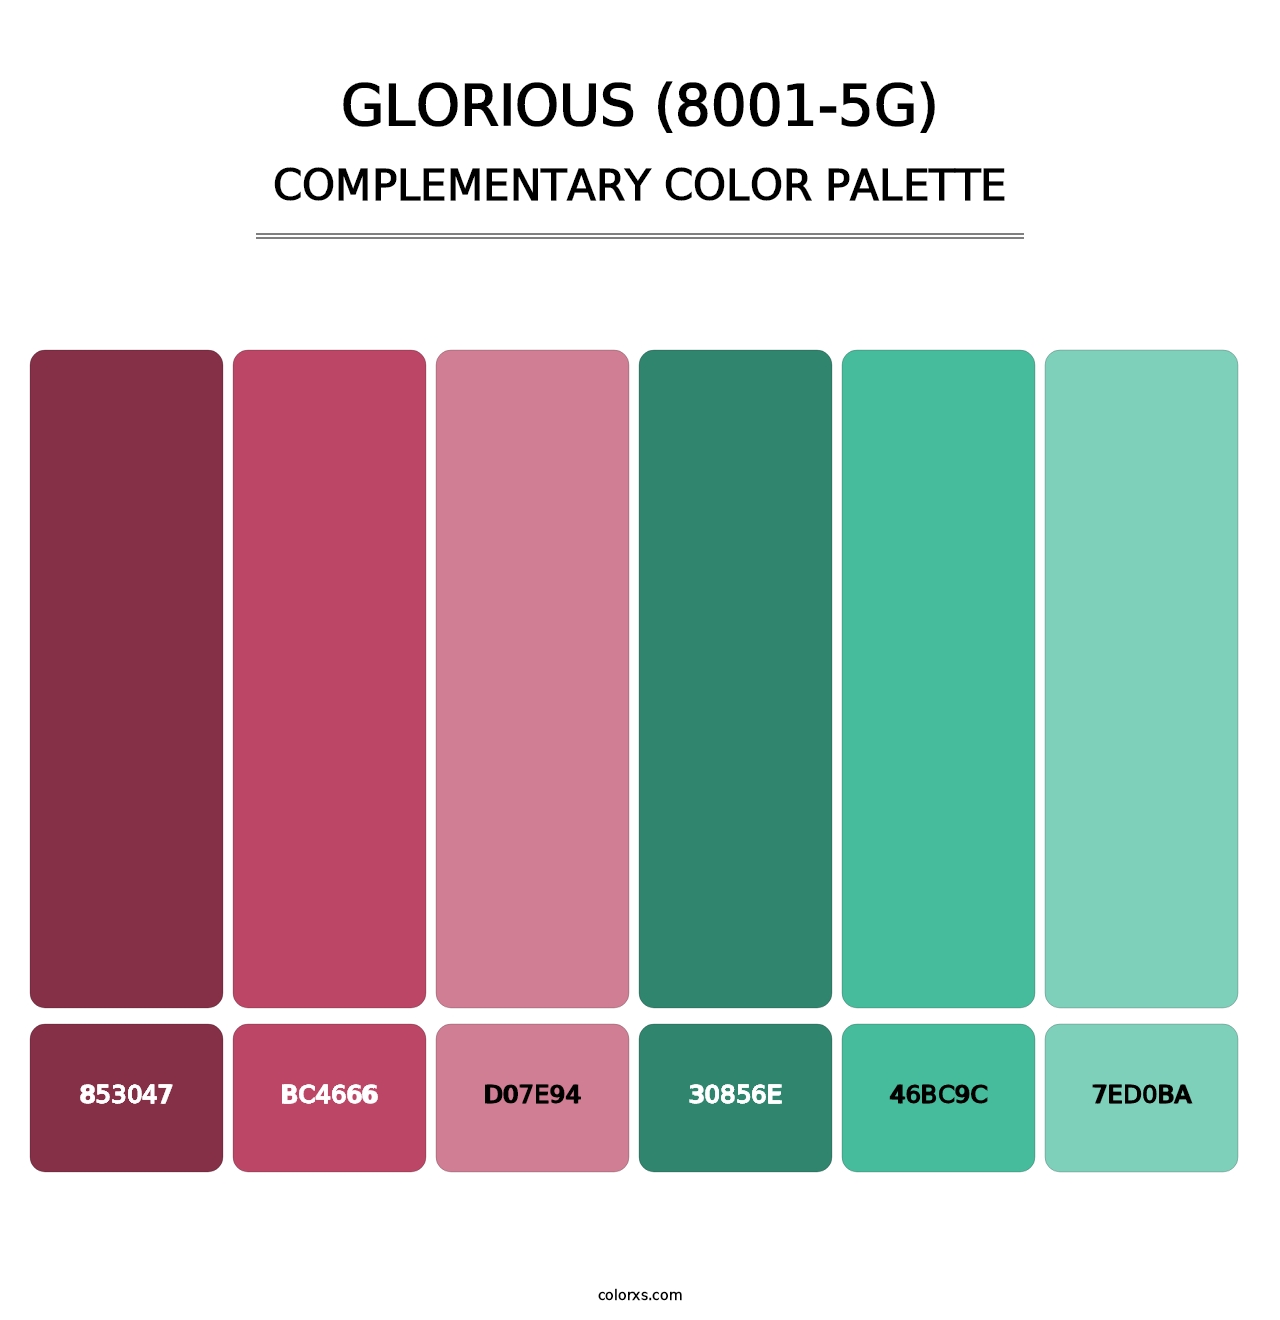 Glorious (8001-5G) - Complementary Color Palette